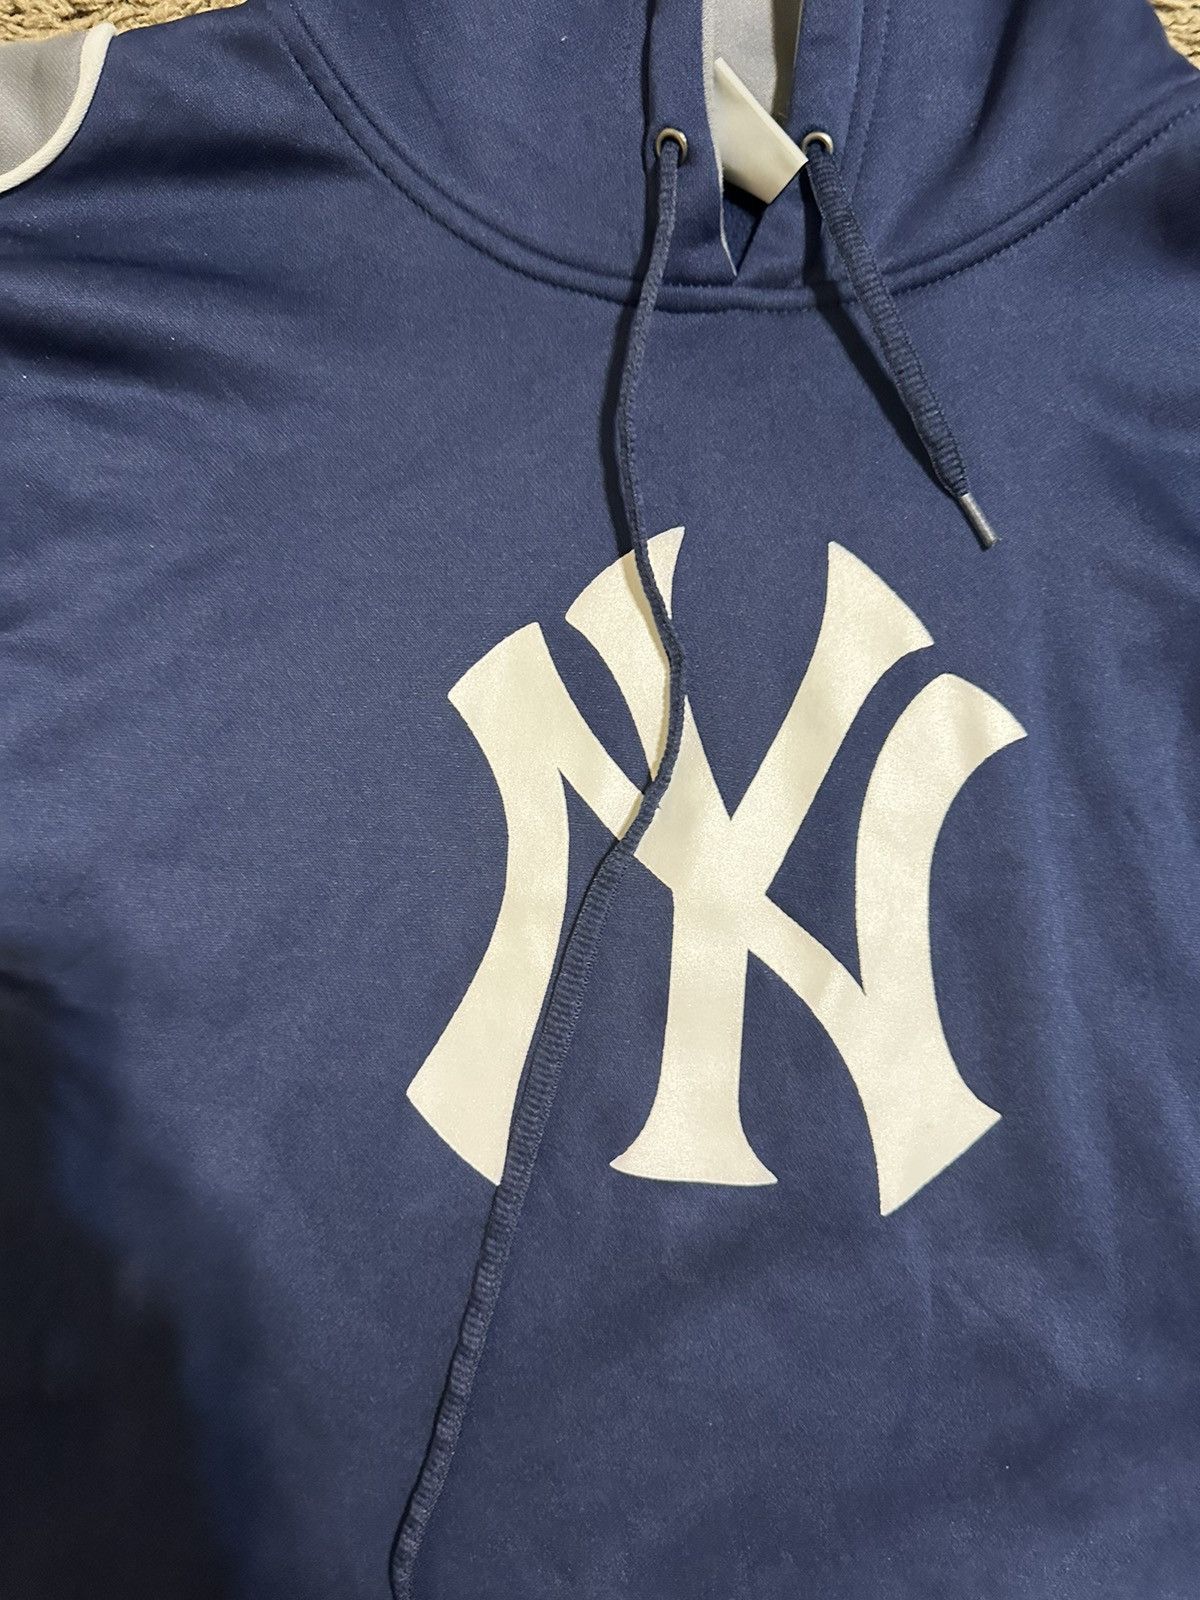 Nike Vintage MLB New York Yankees “face” hoodie 90s size large Size US L / EU 52-54 / 3 - 2 Preview